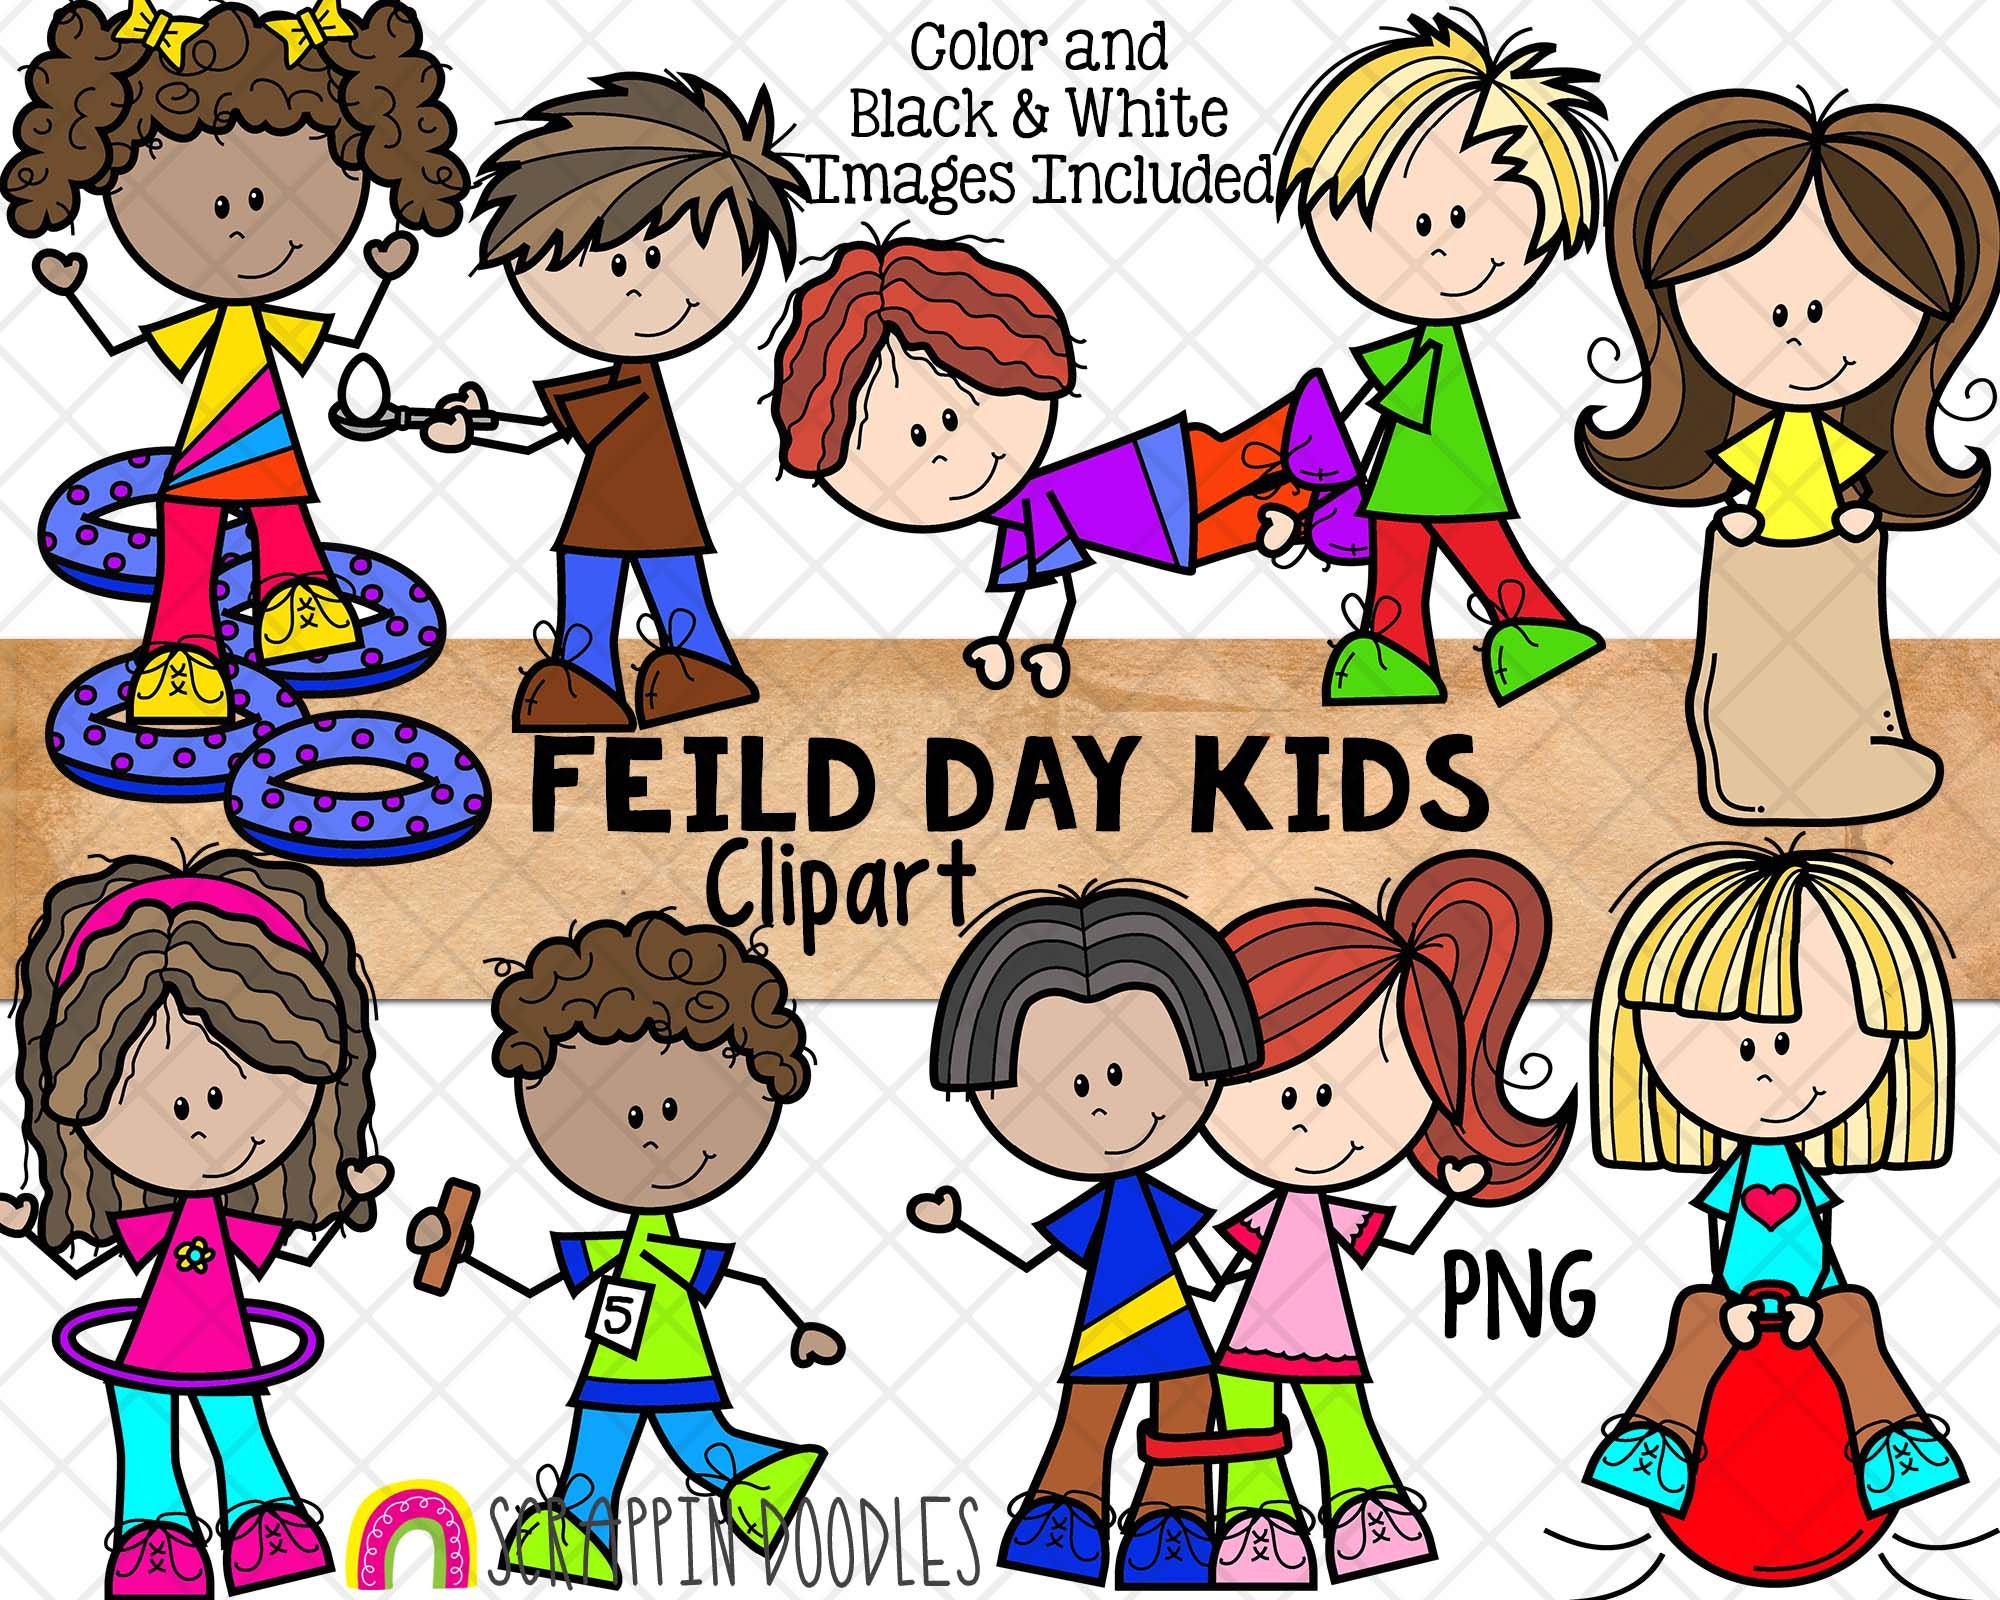 Field Day Clipart track and Field Kids School Tabloid Day - Etsy